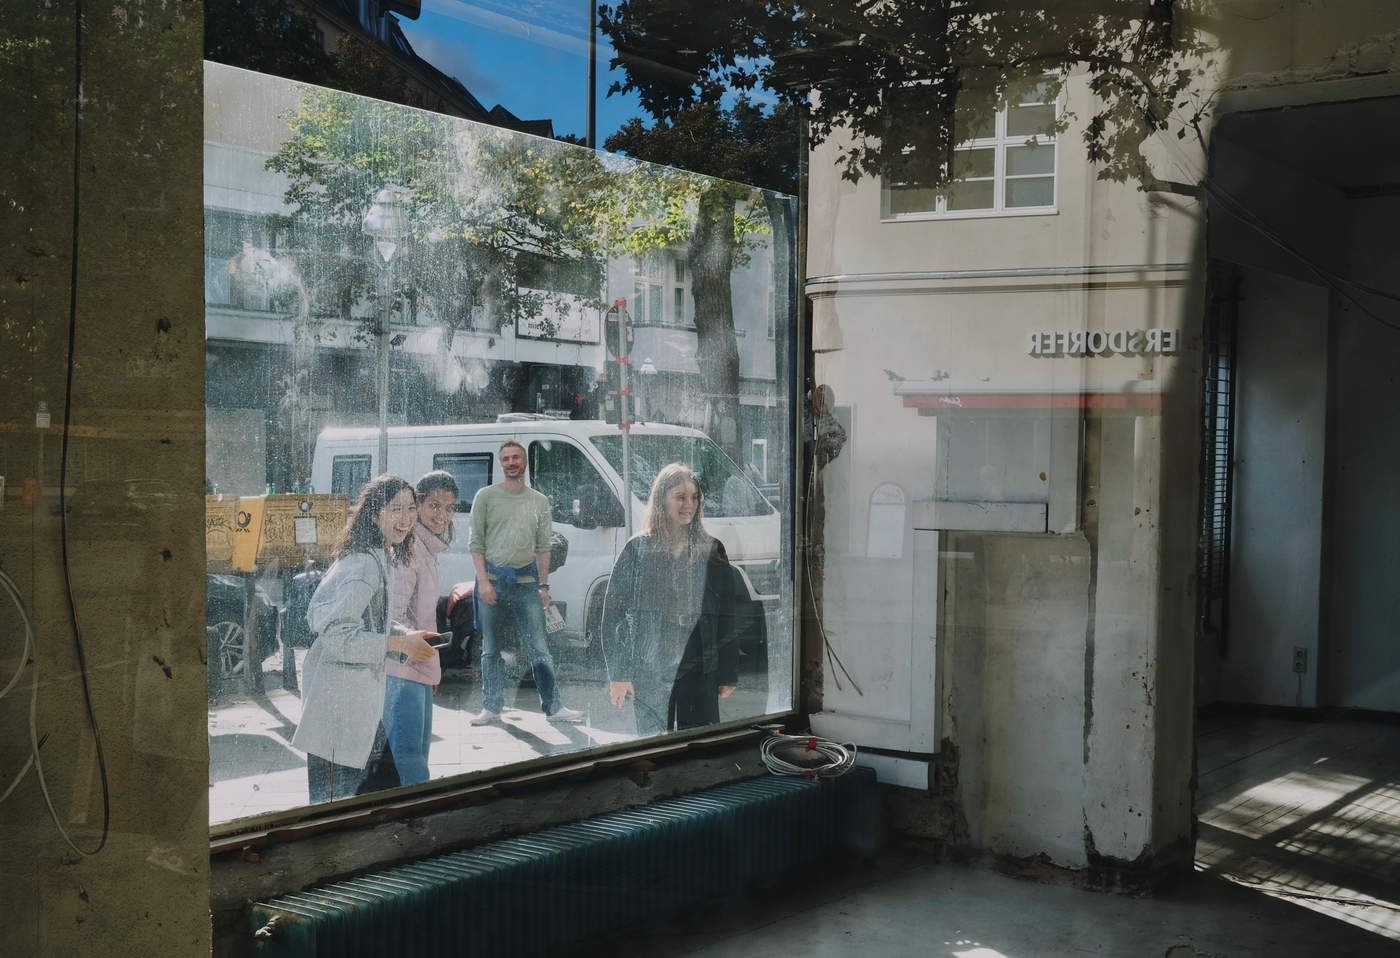 A bunch of smiling people visible through a dusty window